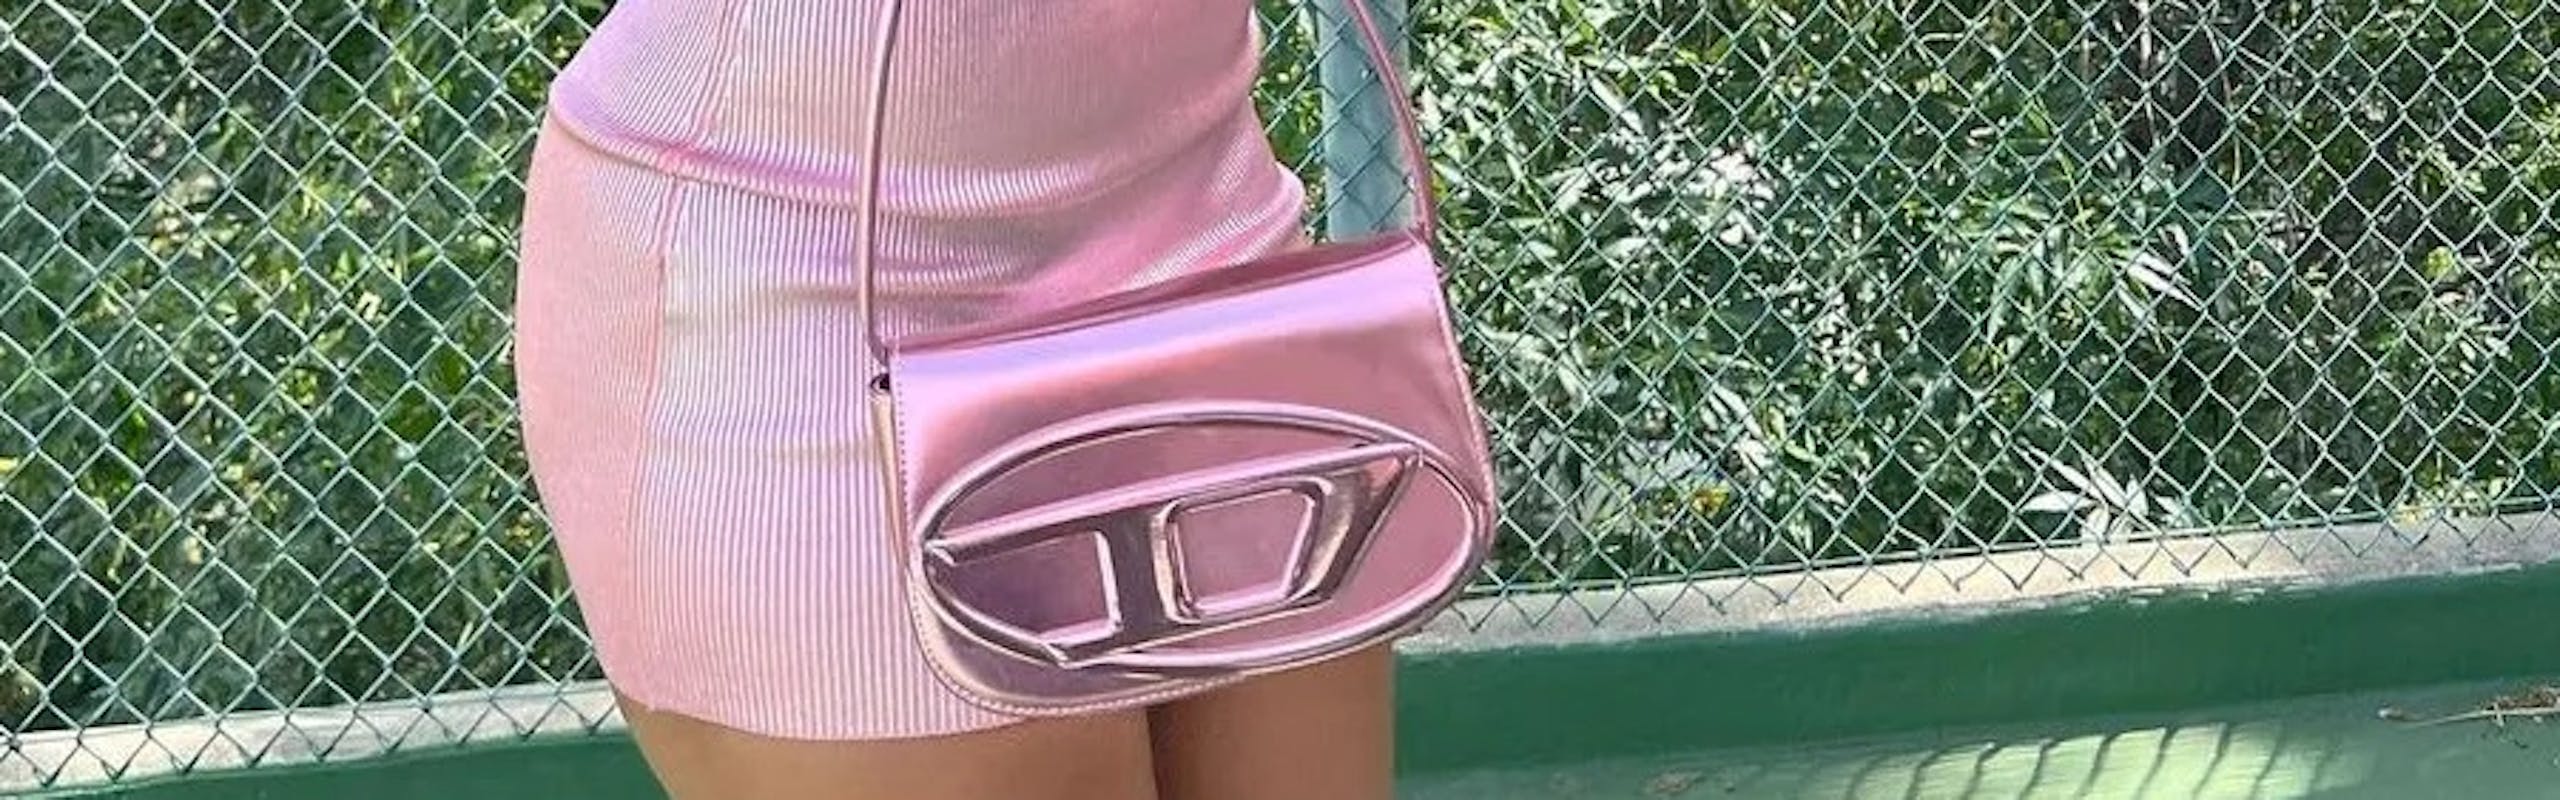 Megan The Stallion wears baby pink Diesel dress while holding matching DR1 Bag.